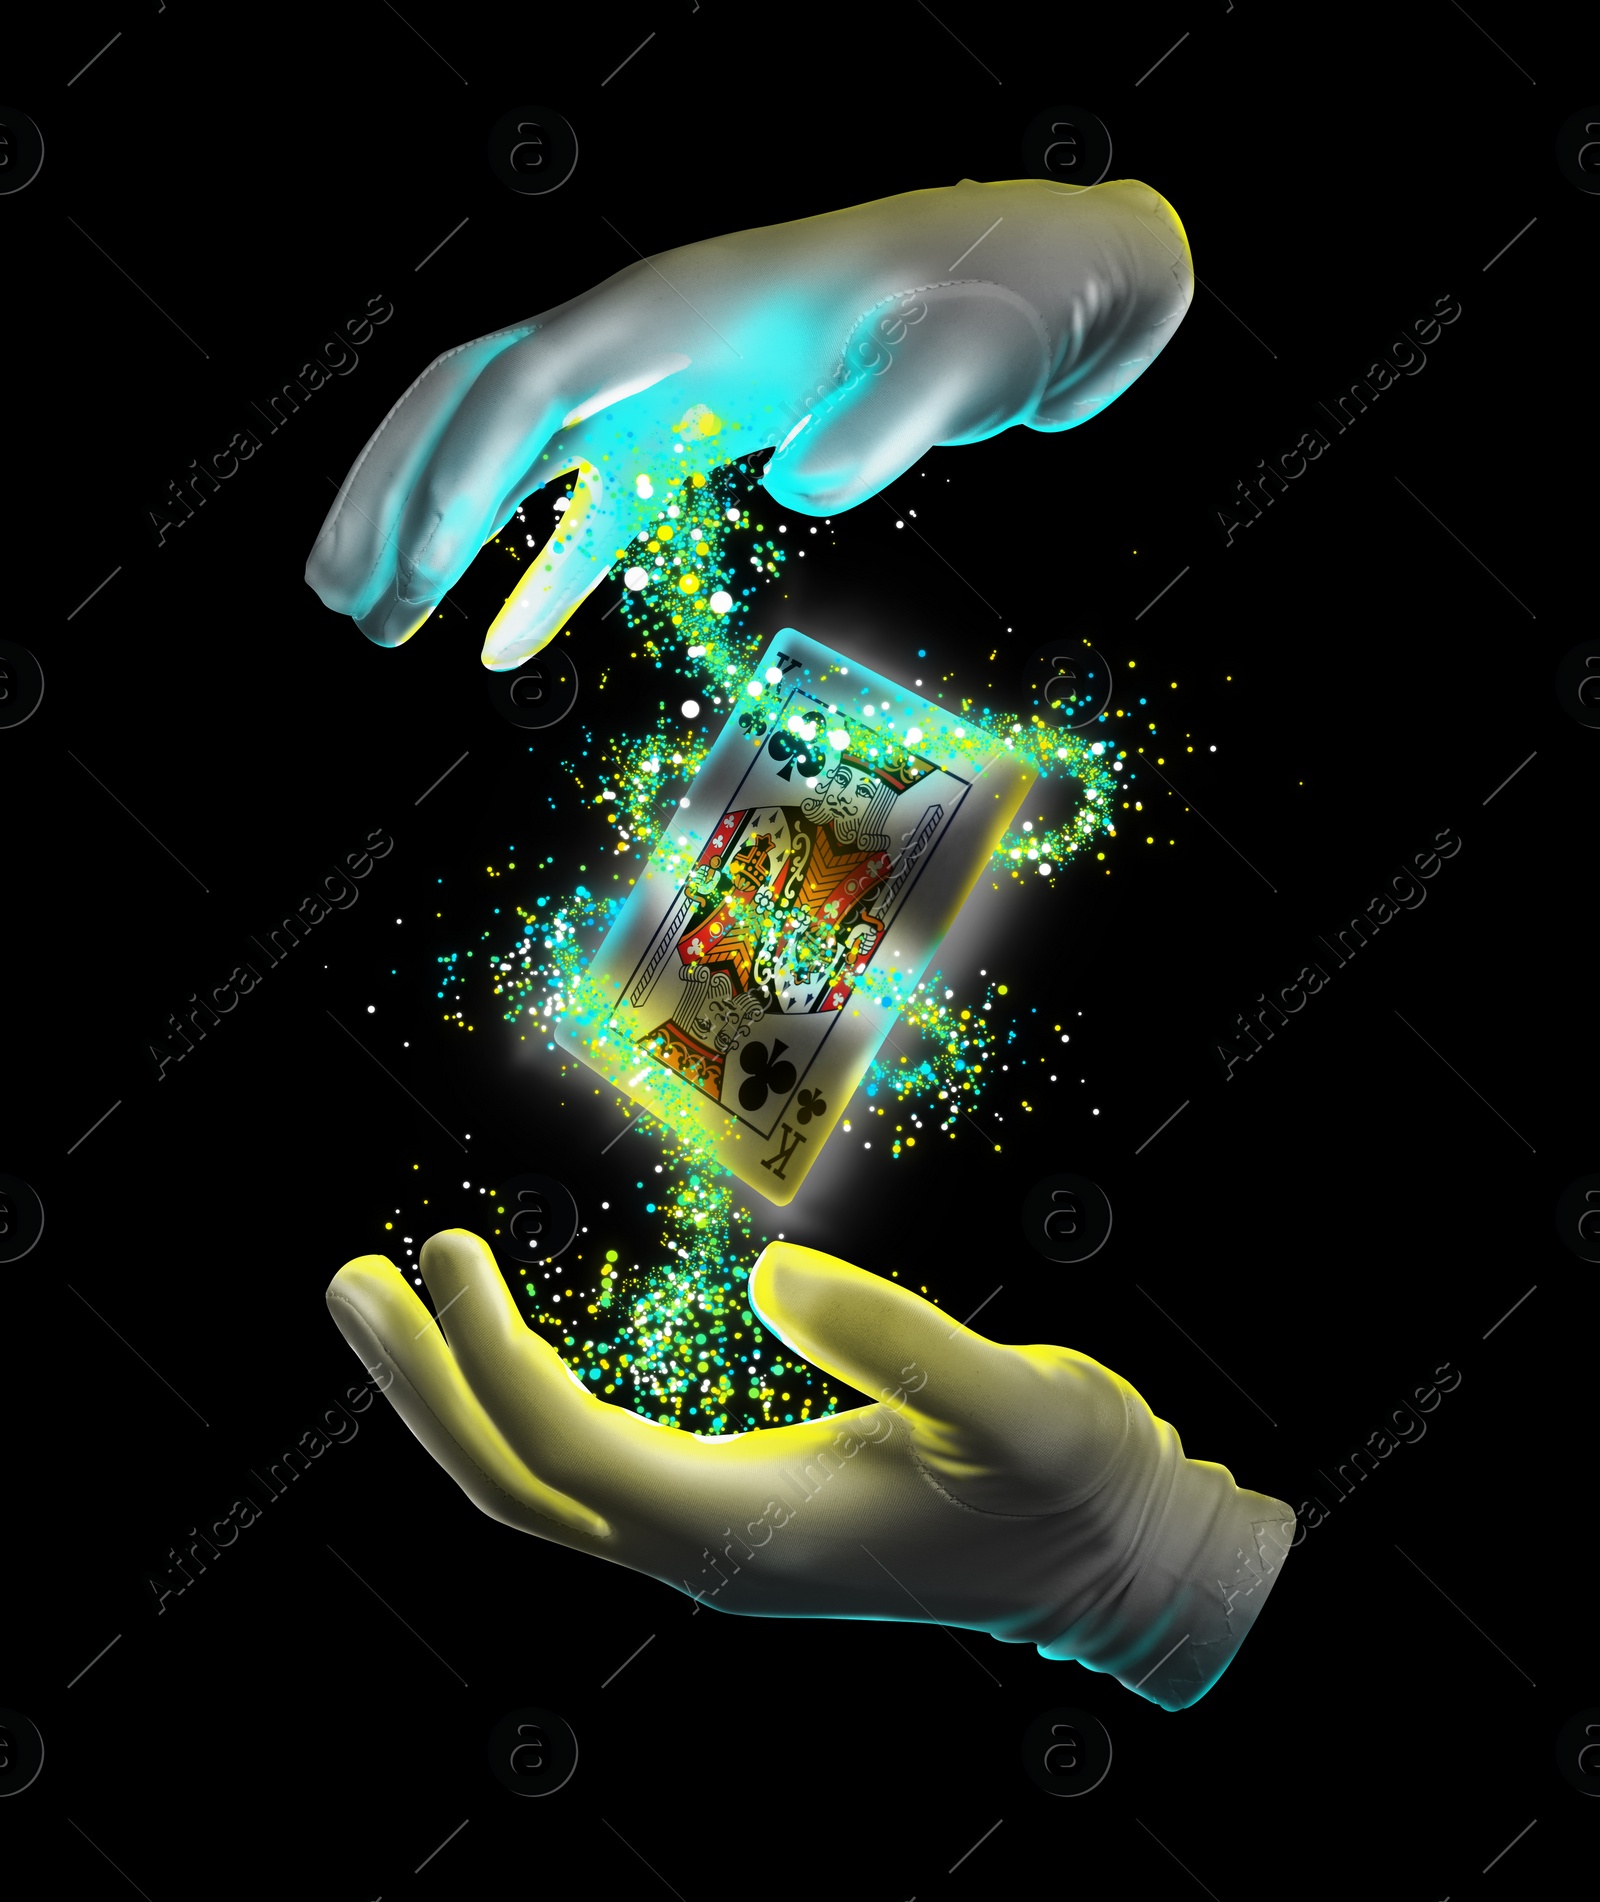 Image of Magician performing card trick on black background, closeup